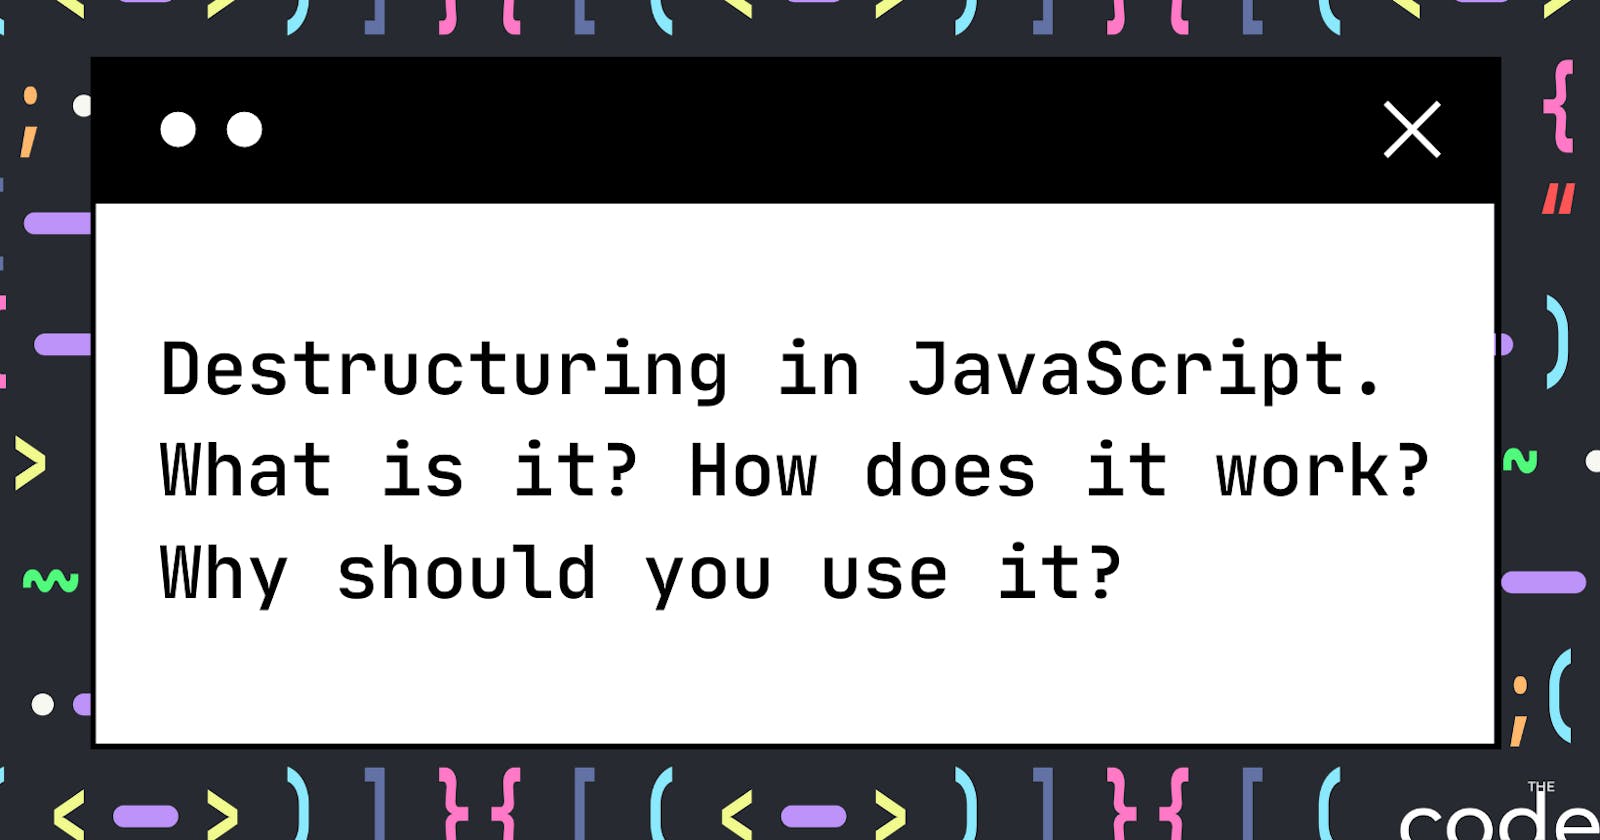 Destructuring in JavaScript. What is it? How does it work? Why should you use it?